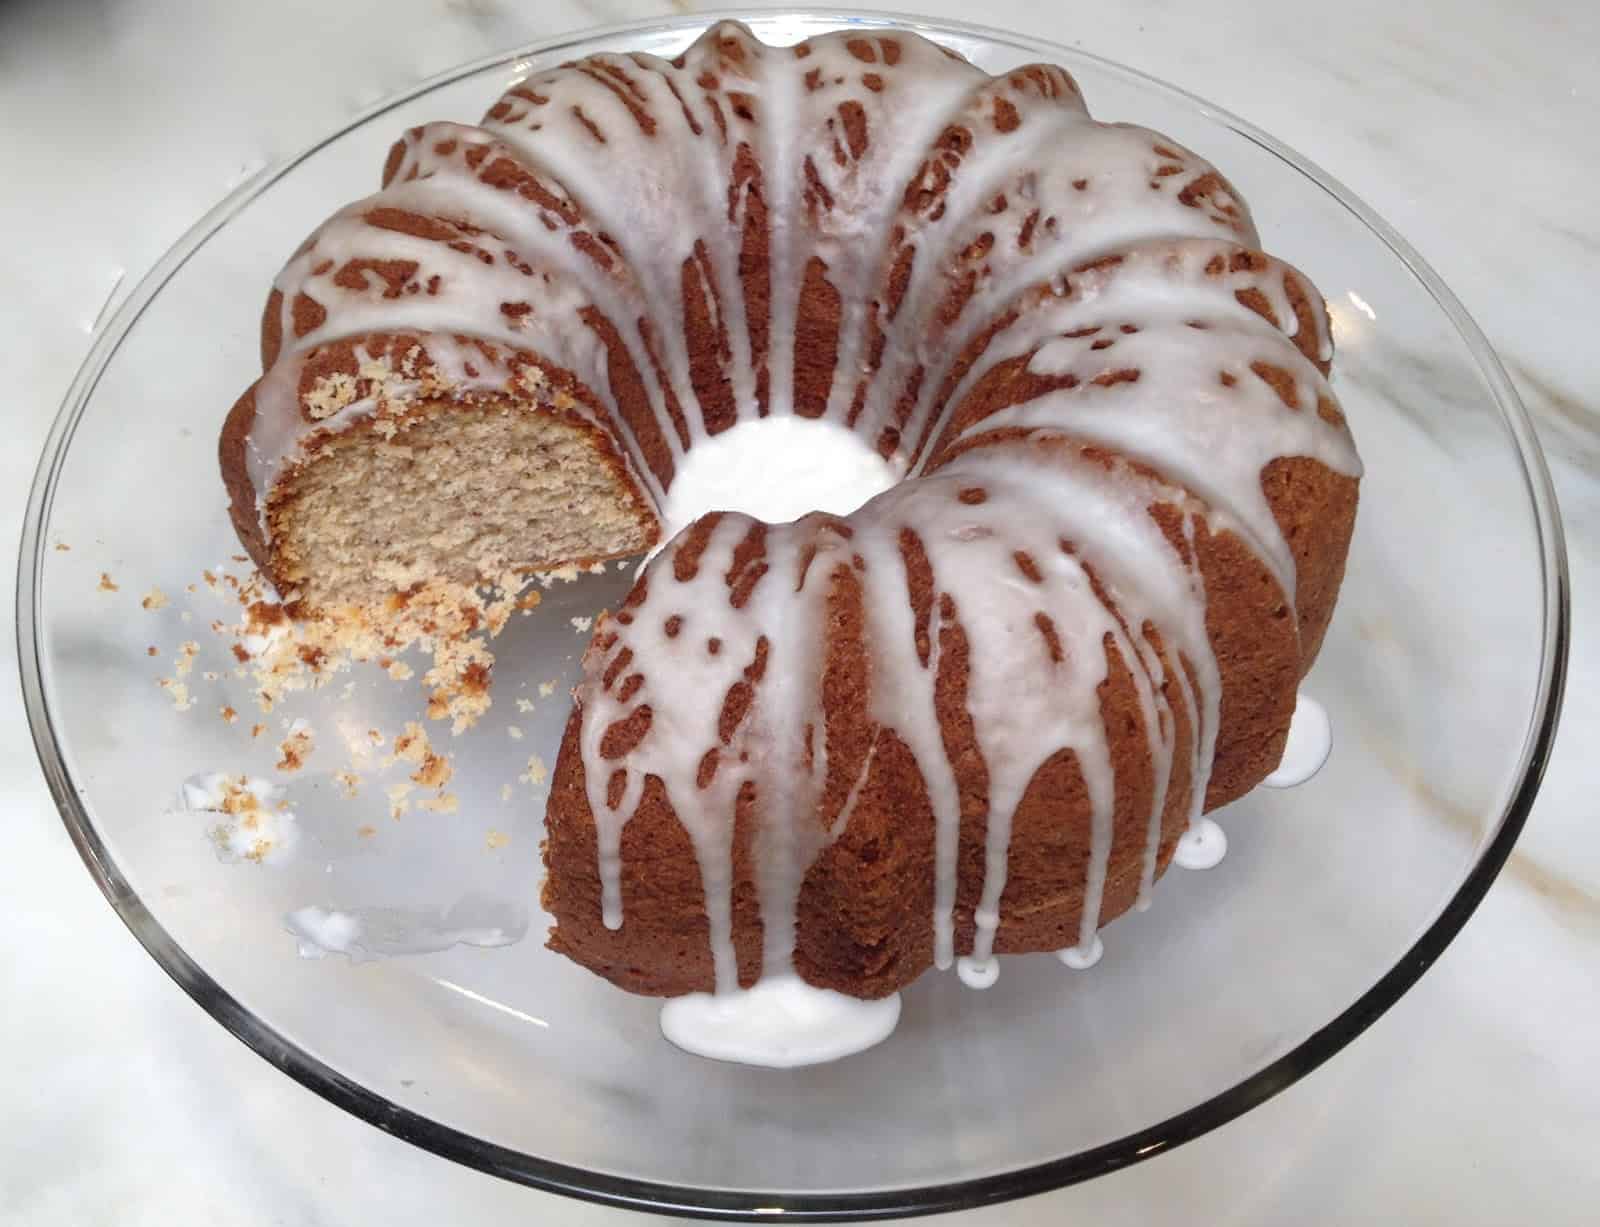 A Funny Thing Happened on the Way to Baking this Almond Bundt Cake